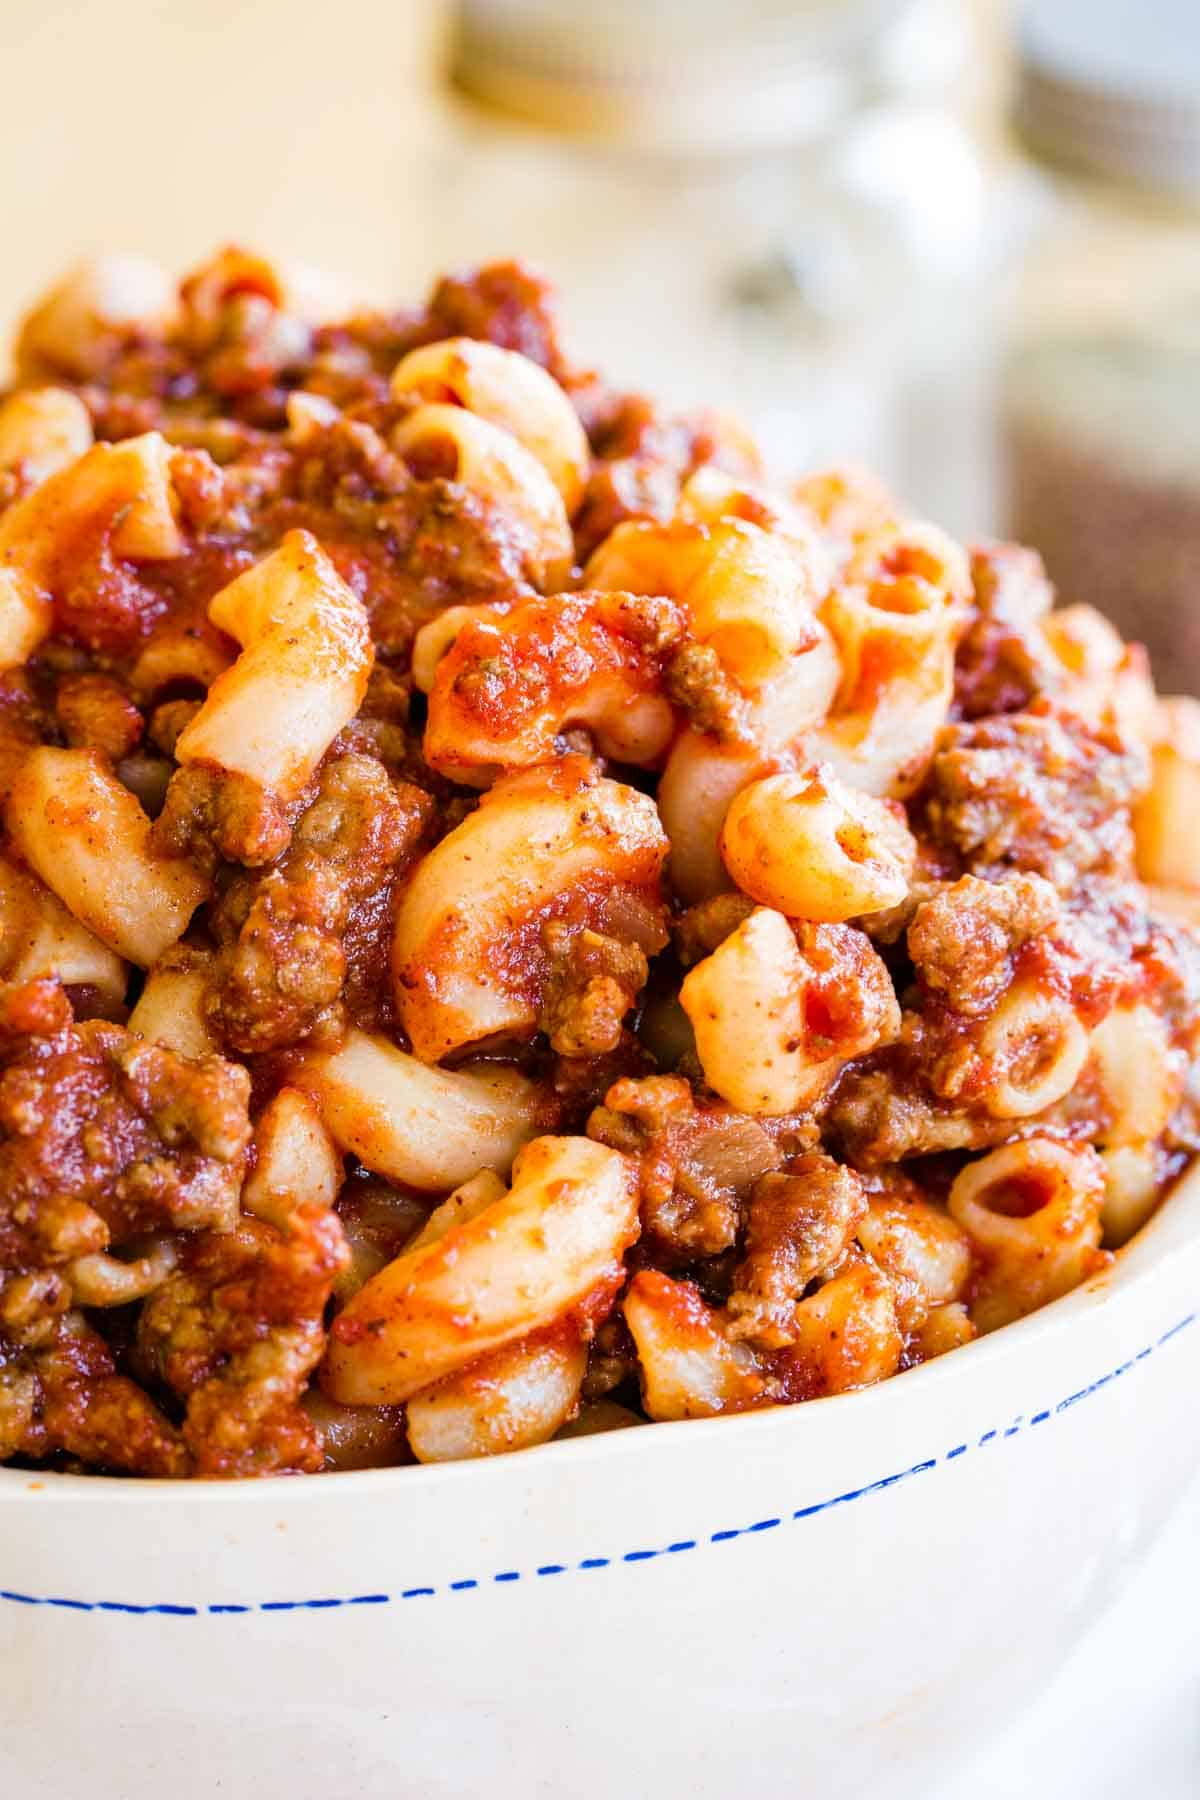 Elbow noodles are infused with a meaty tomato sauce in this version of beefaroni.